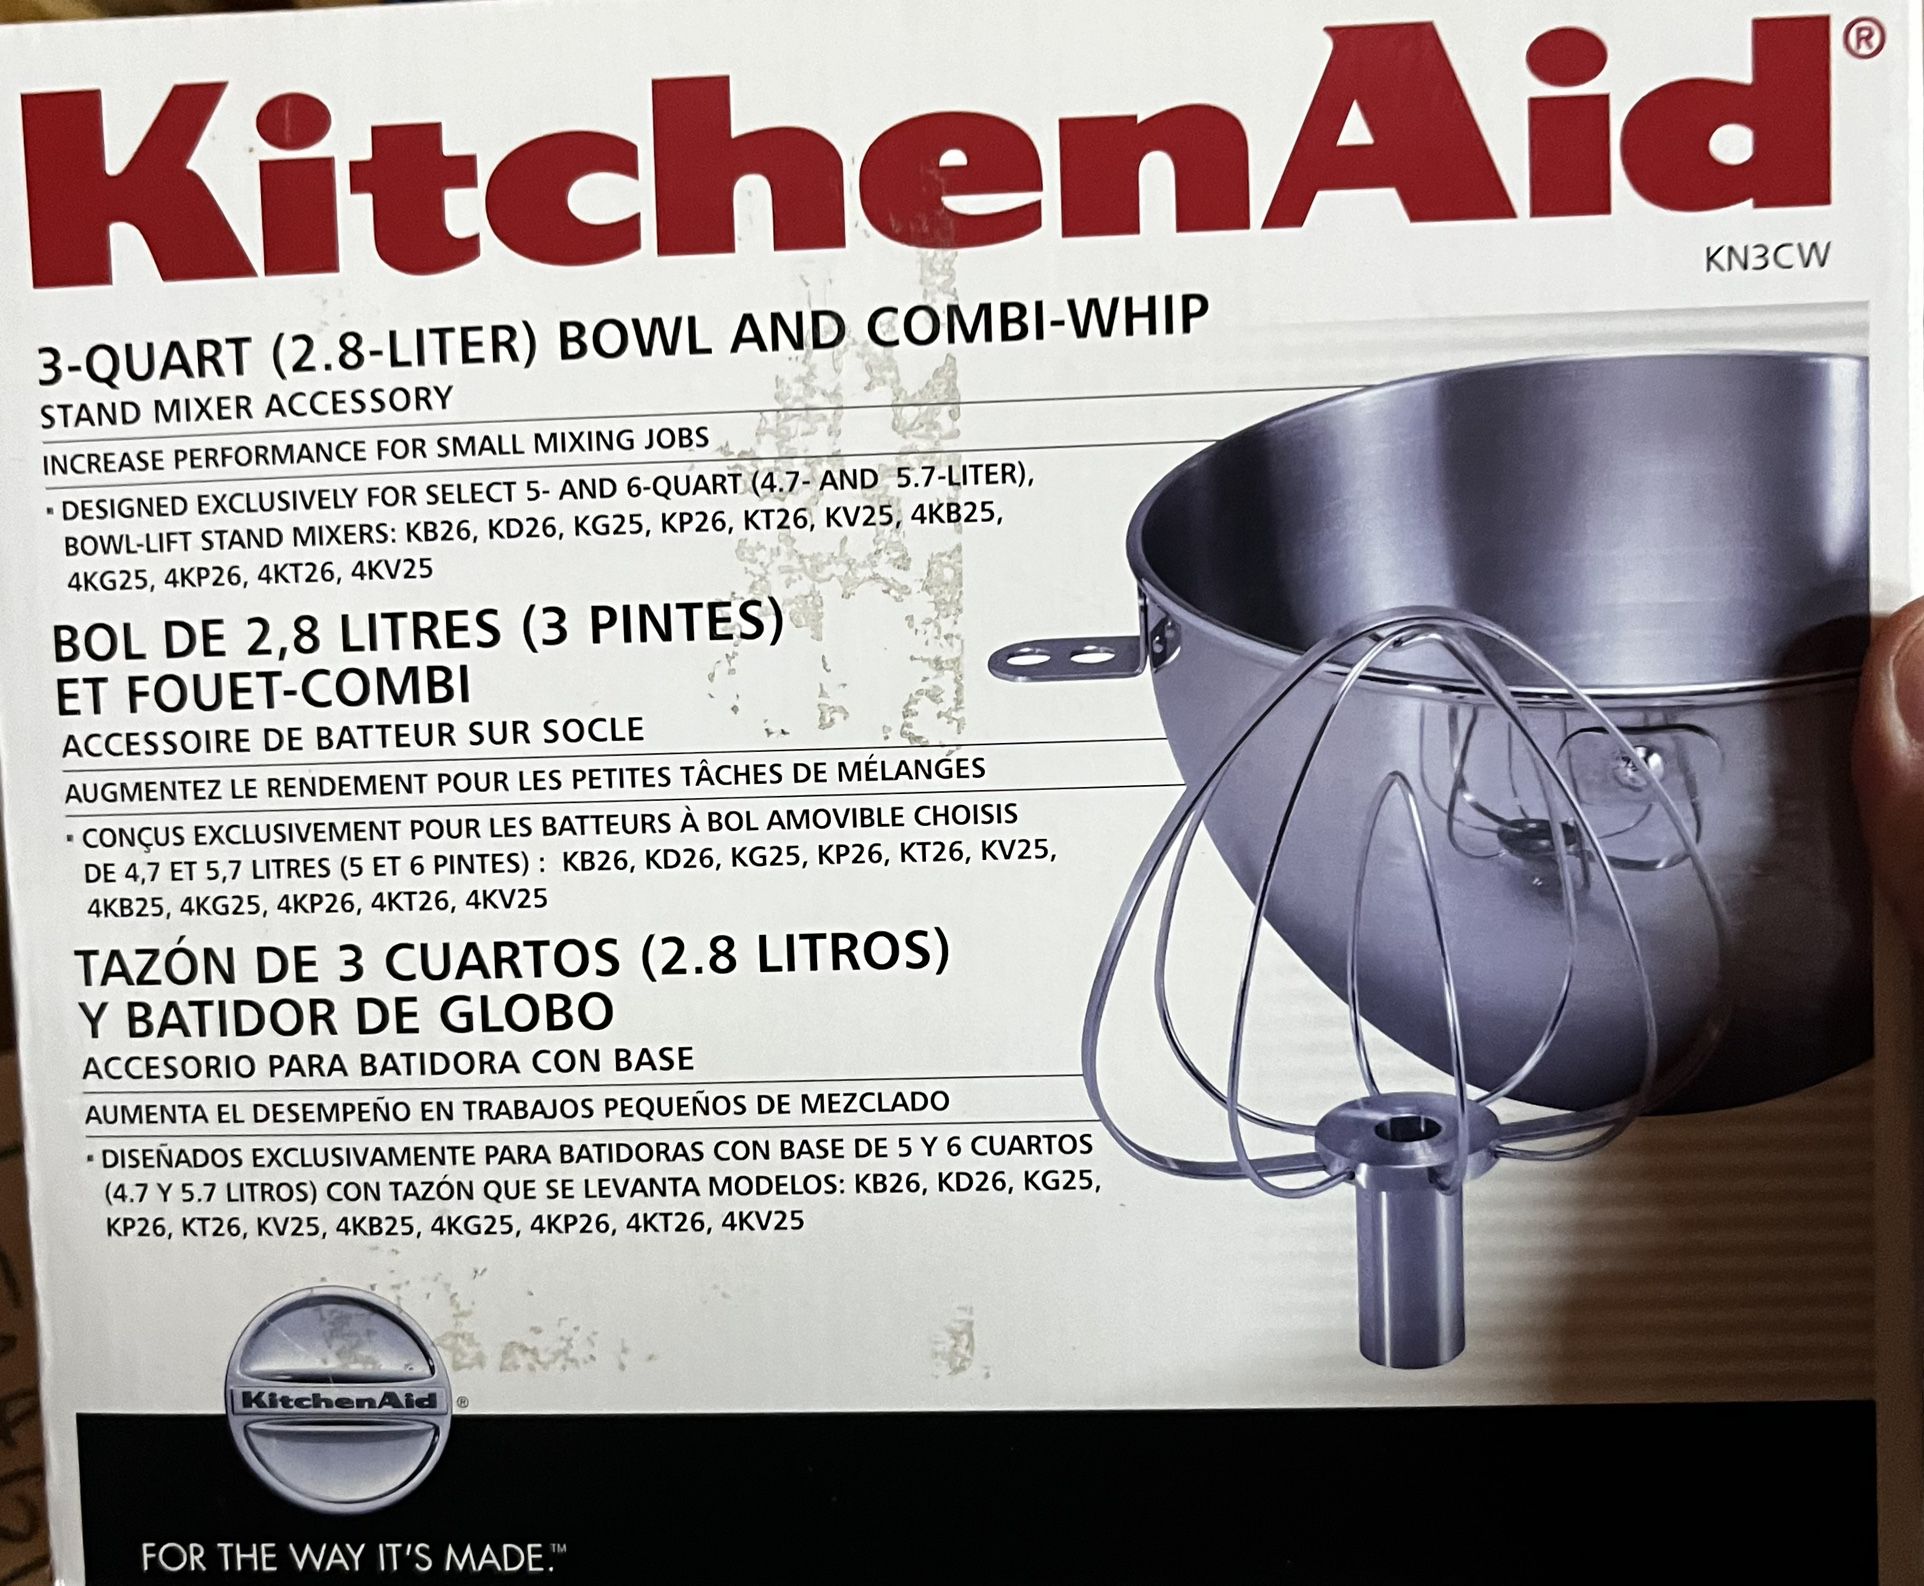 KitchenAid 3 Quart Stainless Steel Bowl and Combi Whip for 5- & 6-Quart Mixers